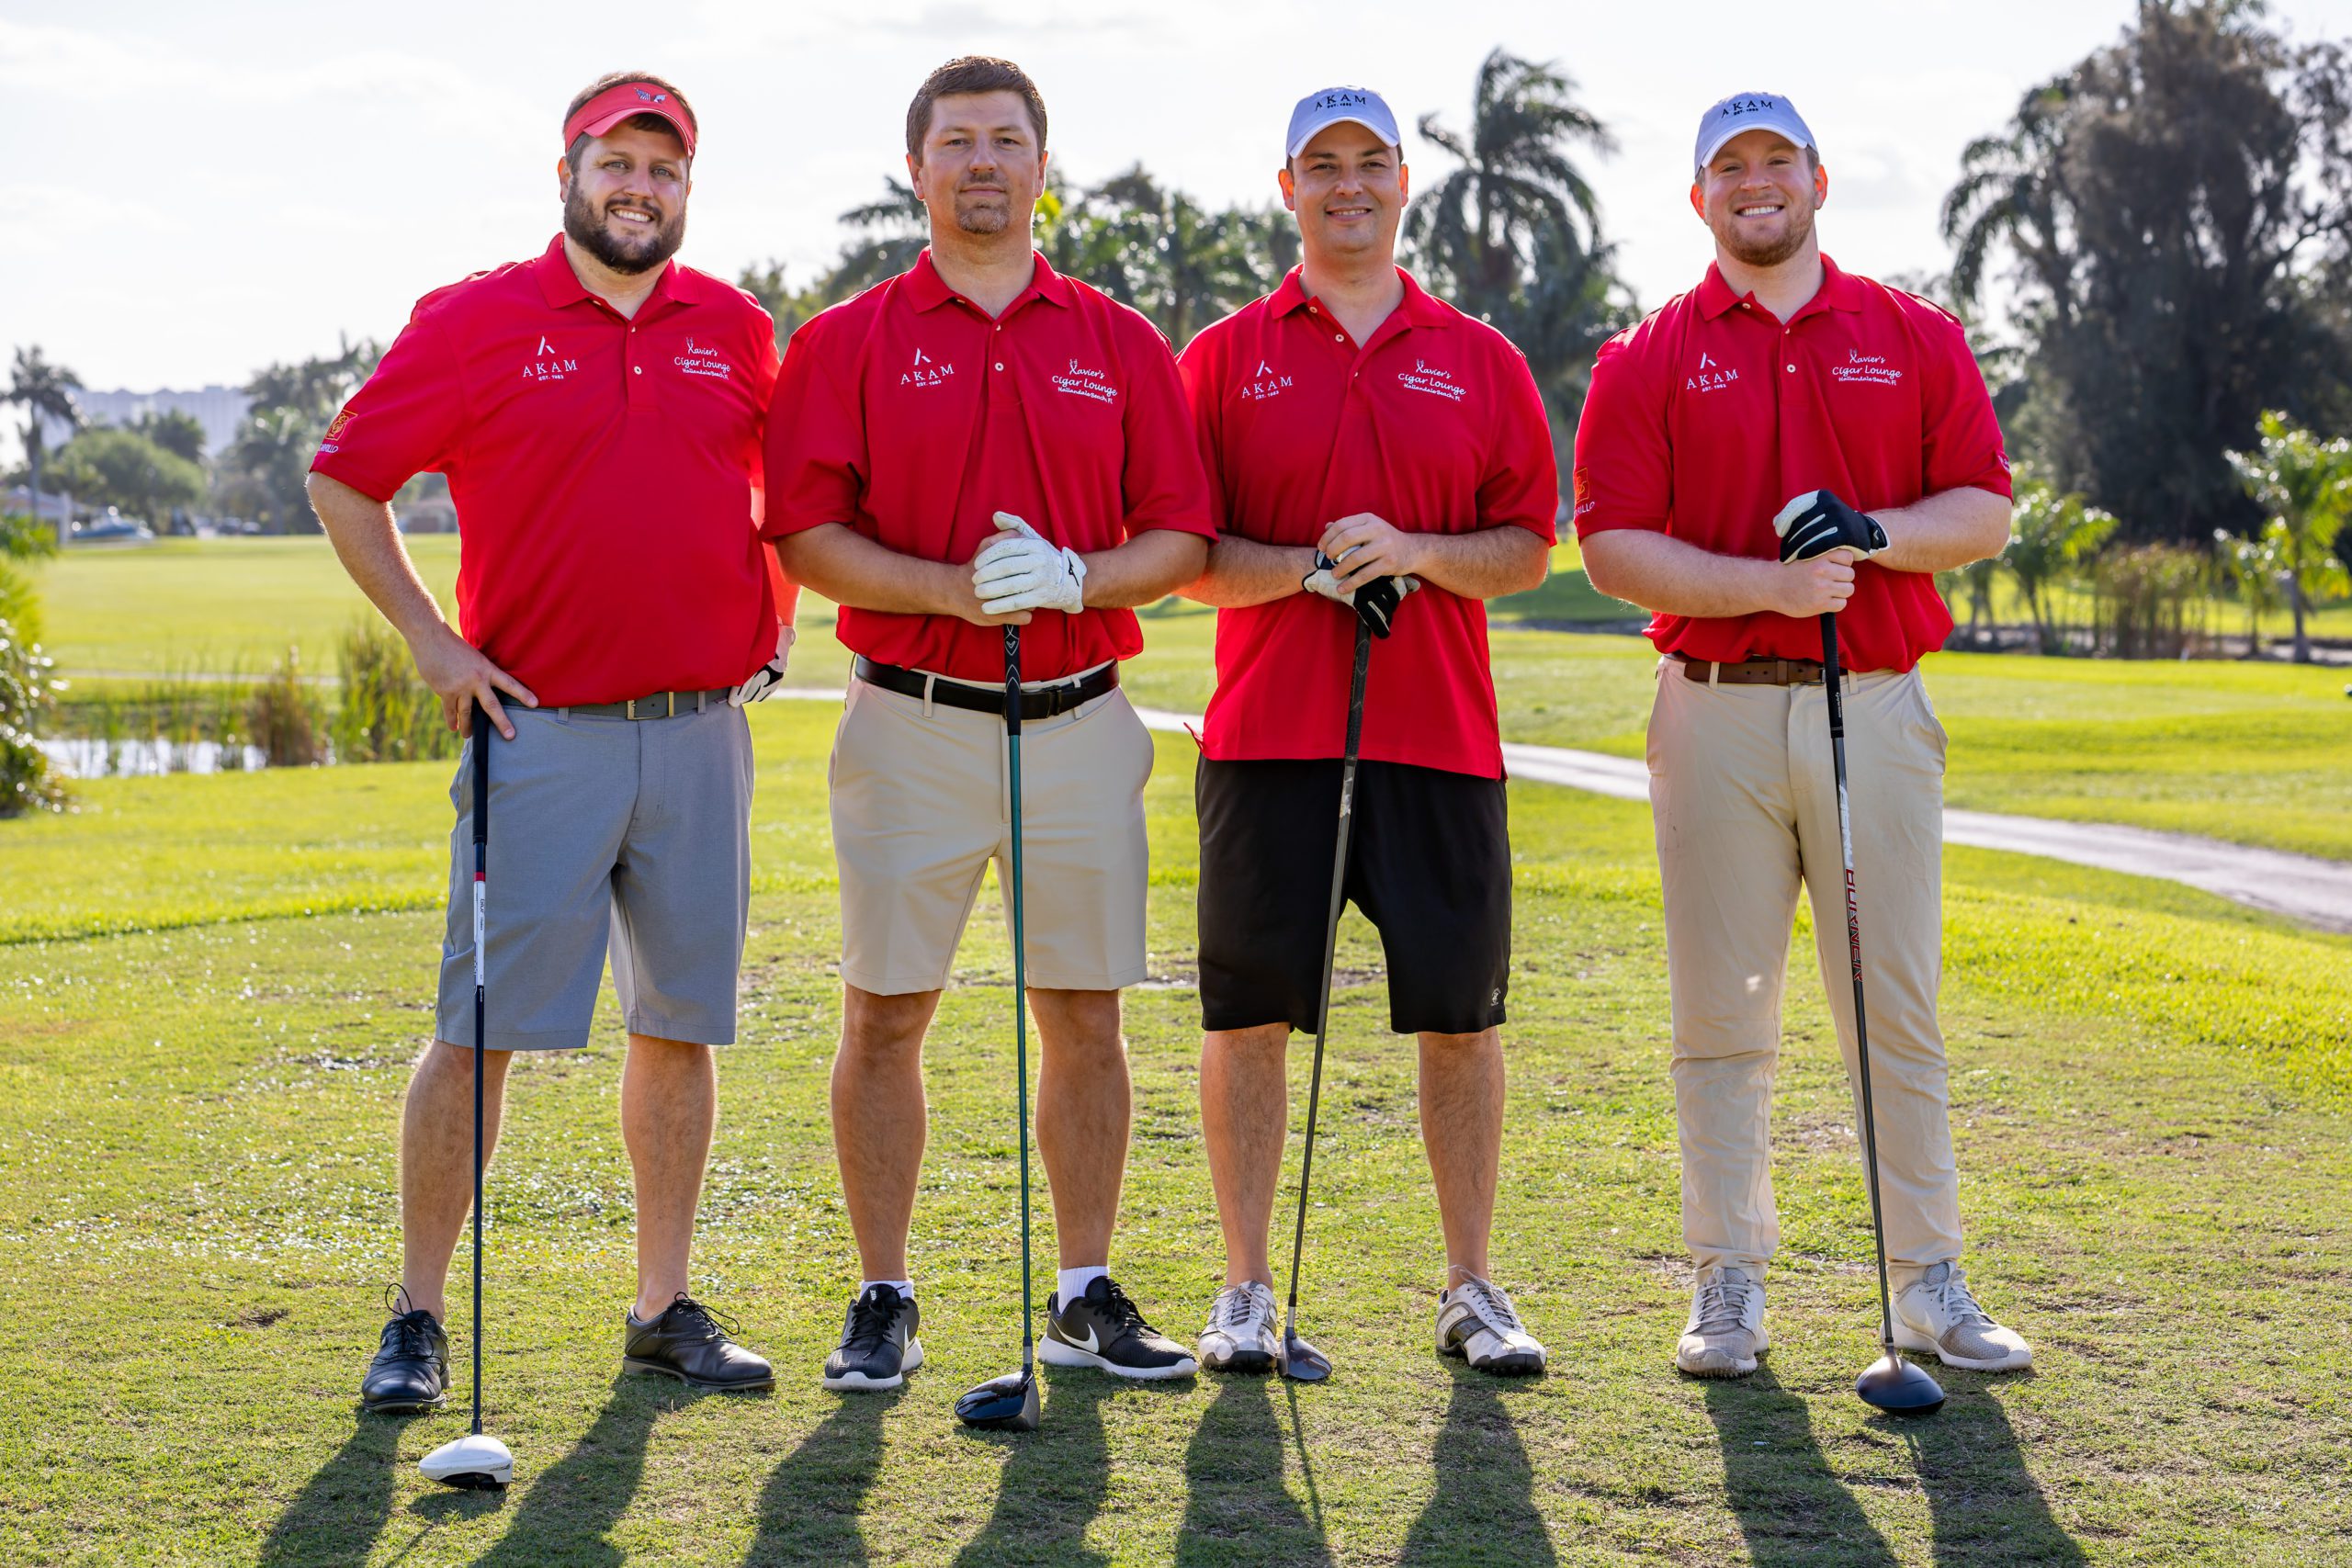 LDA Charity Golf Tournament Raises 5,000 for The Victory Center for Autism Aventura Community